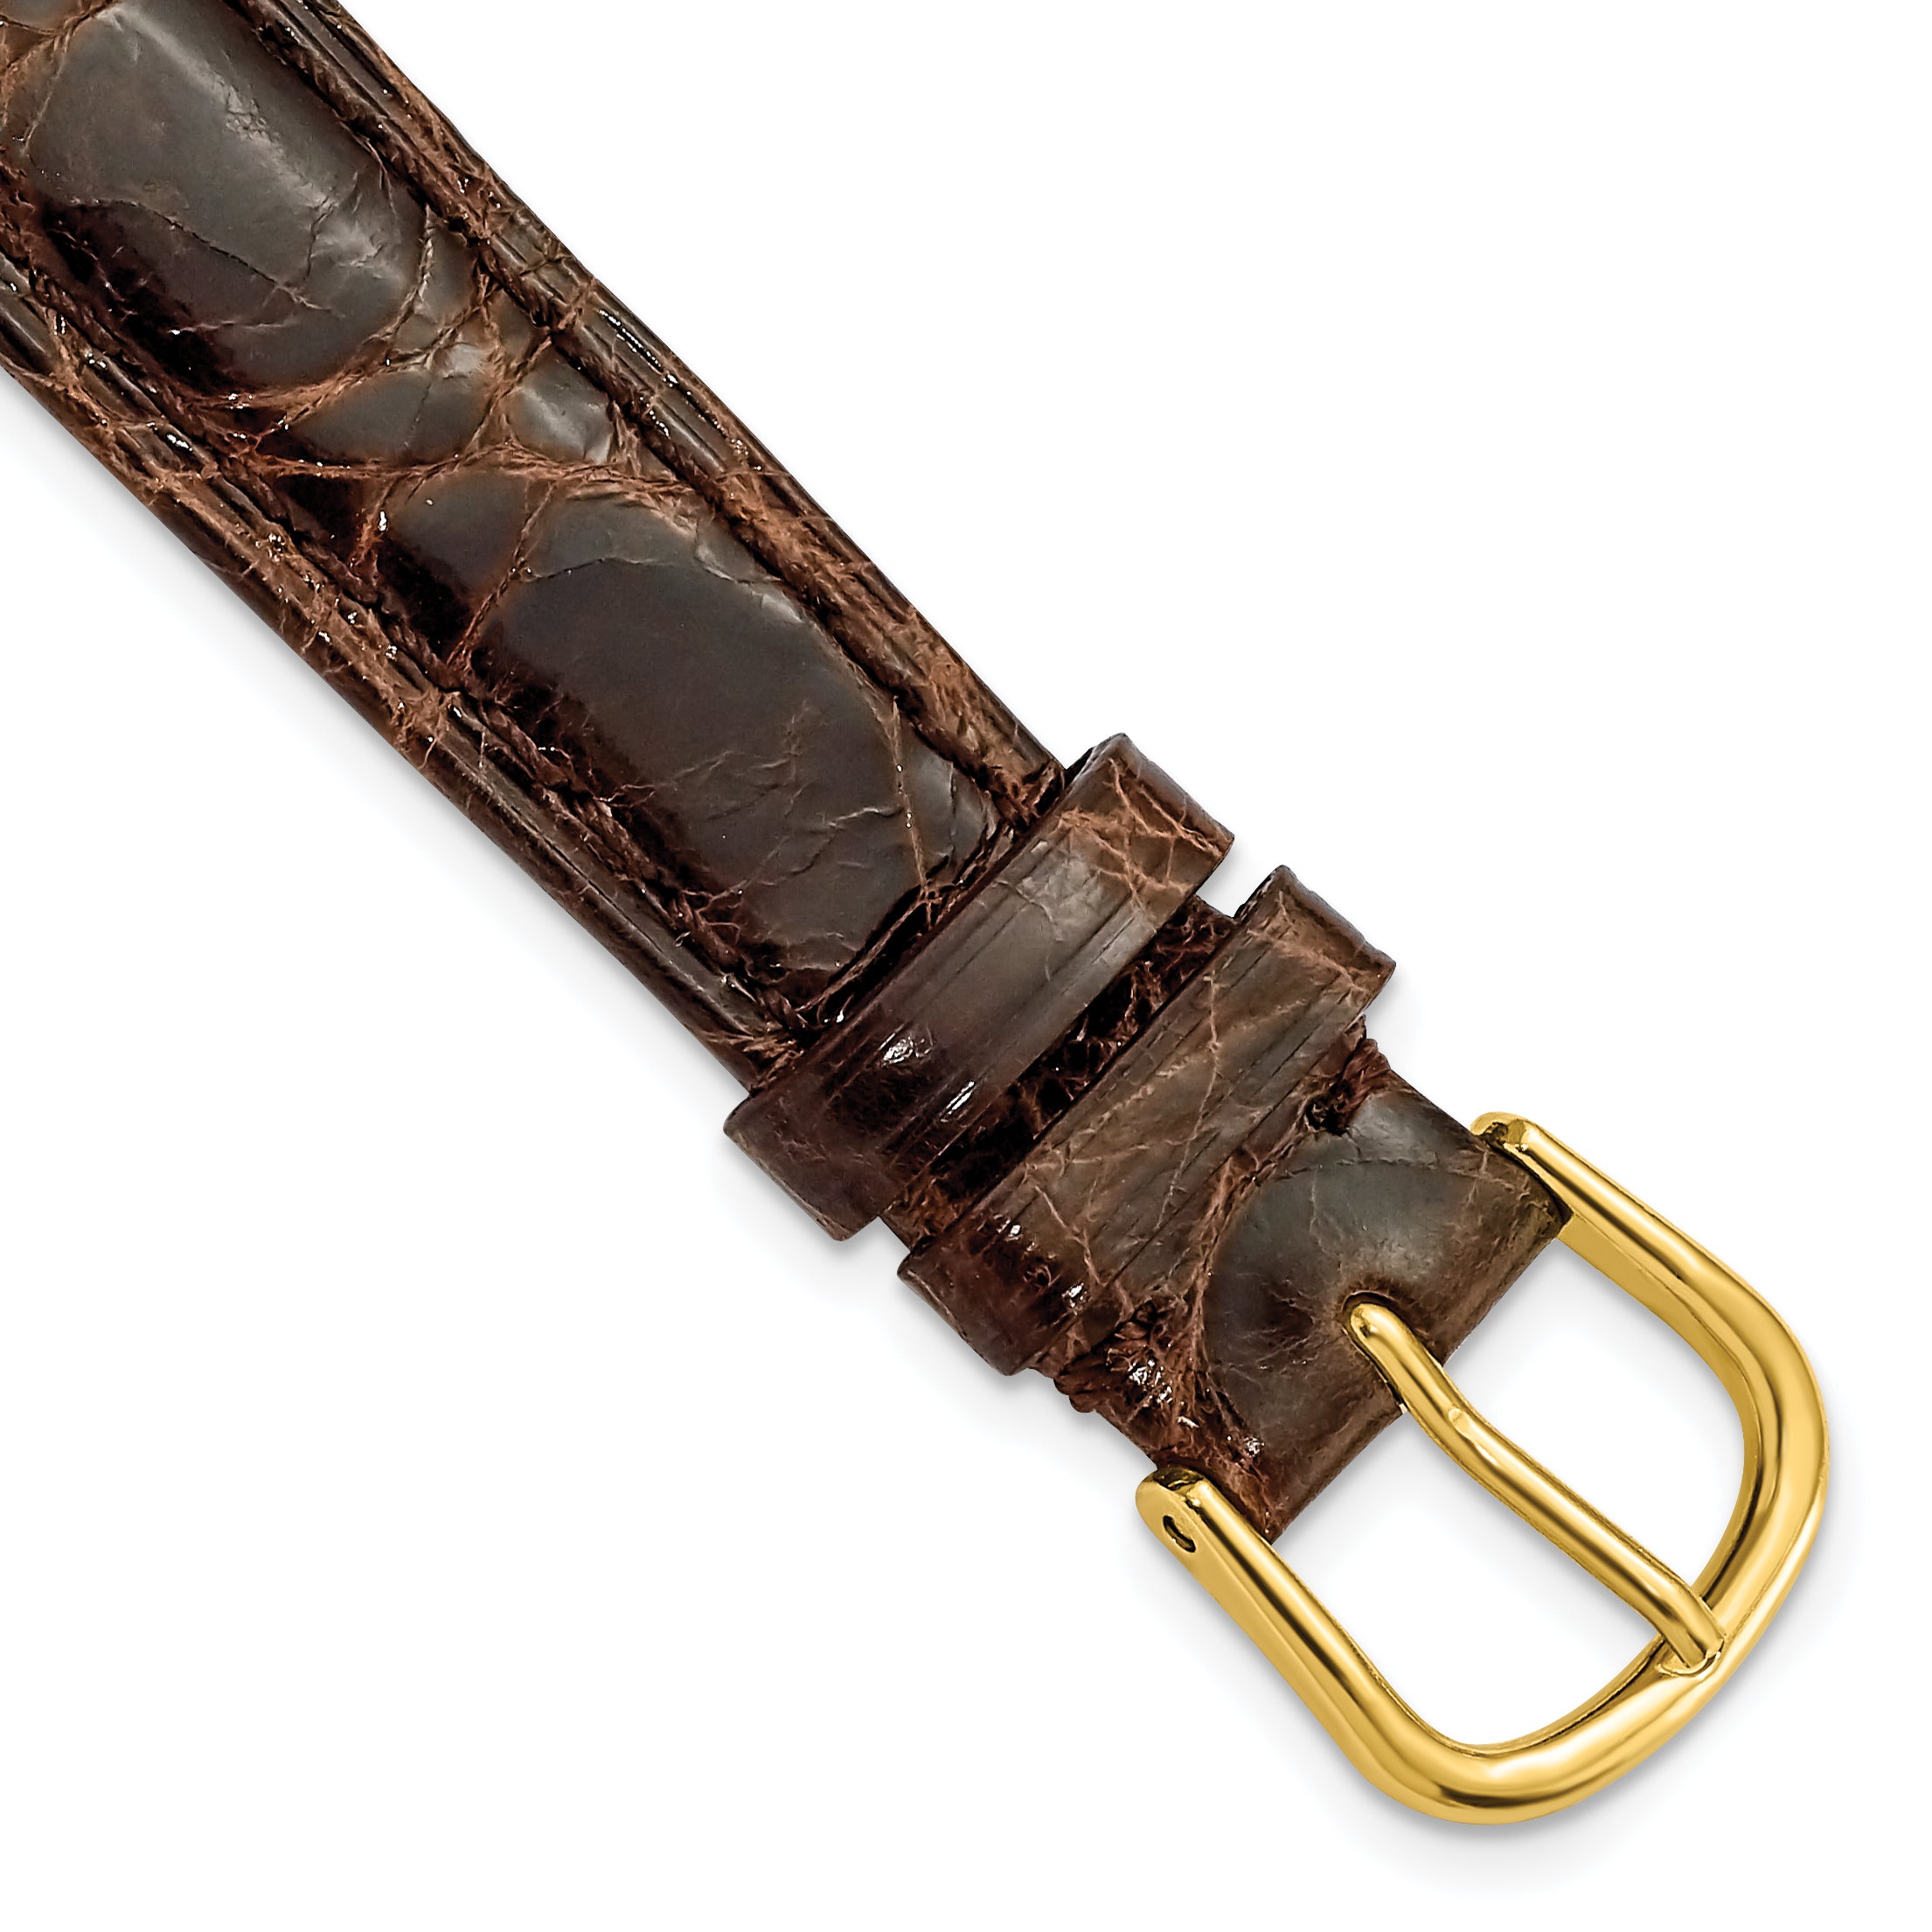 DeBeer 14mm Dark Brown Genuine Caiman Leather with Gold-tone Buckle 6.75 inch Watch Band